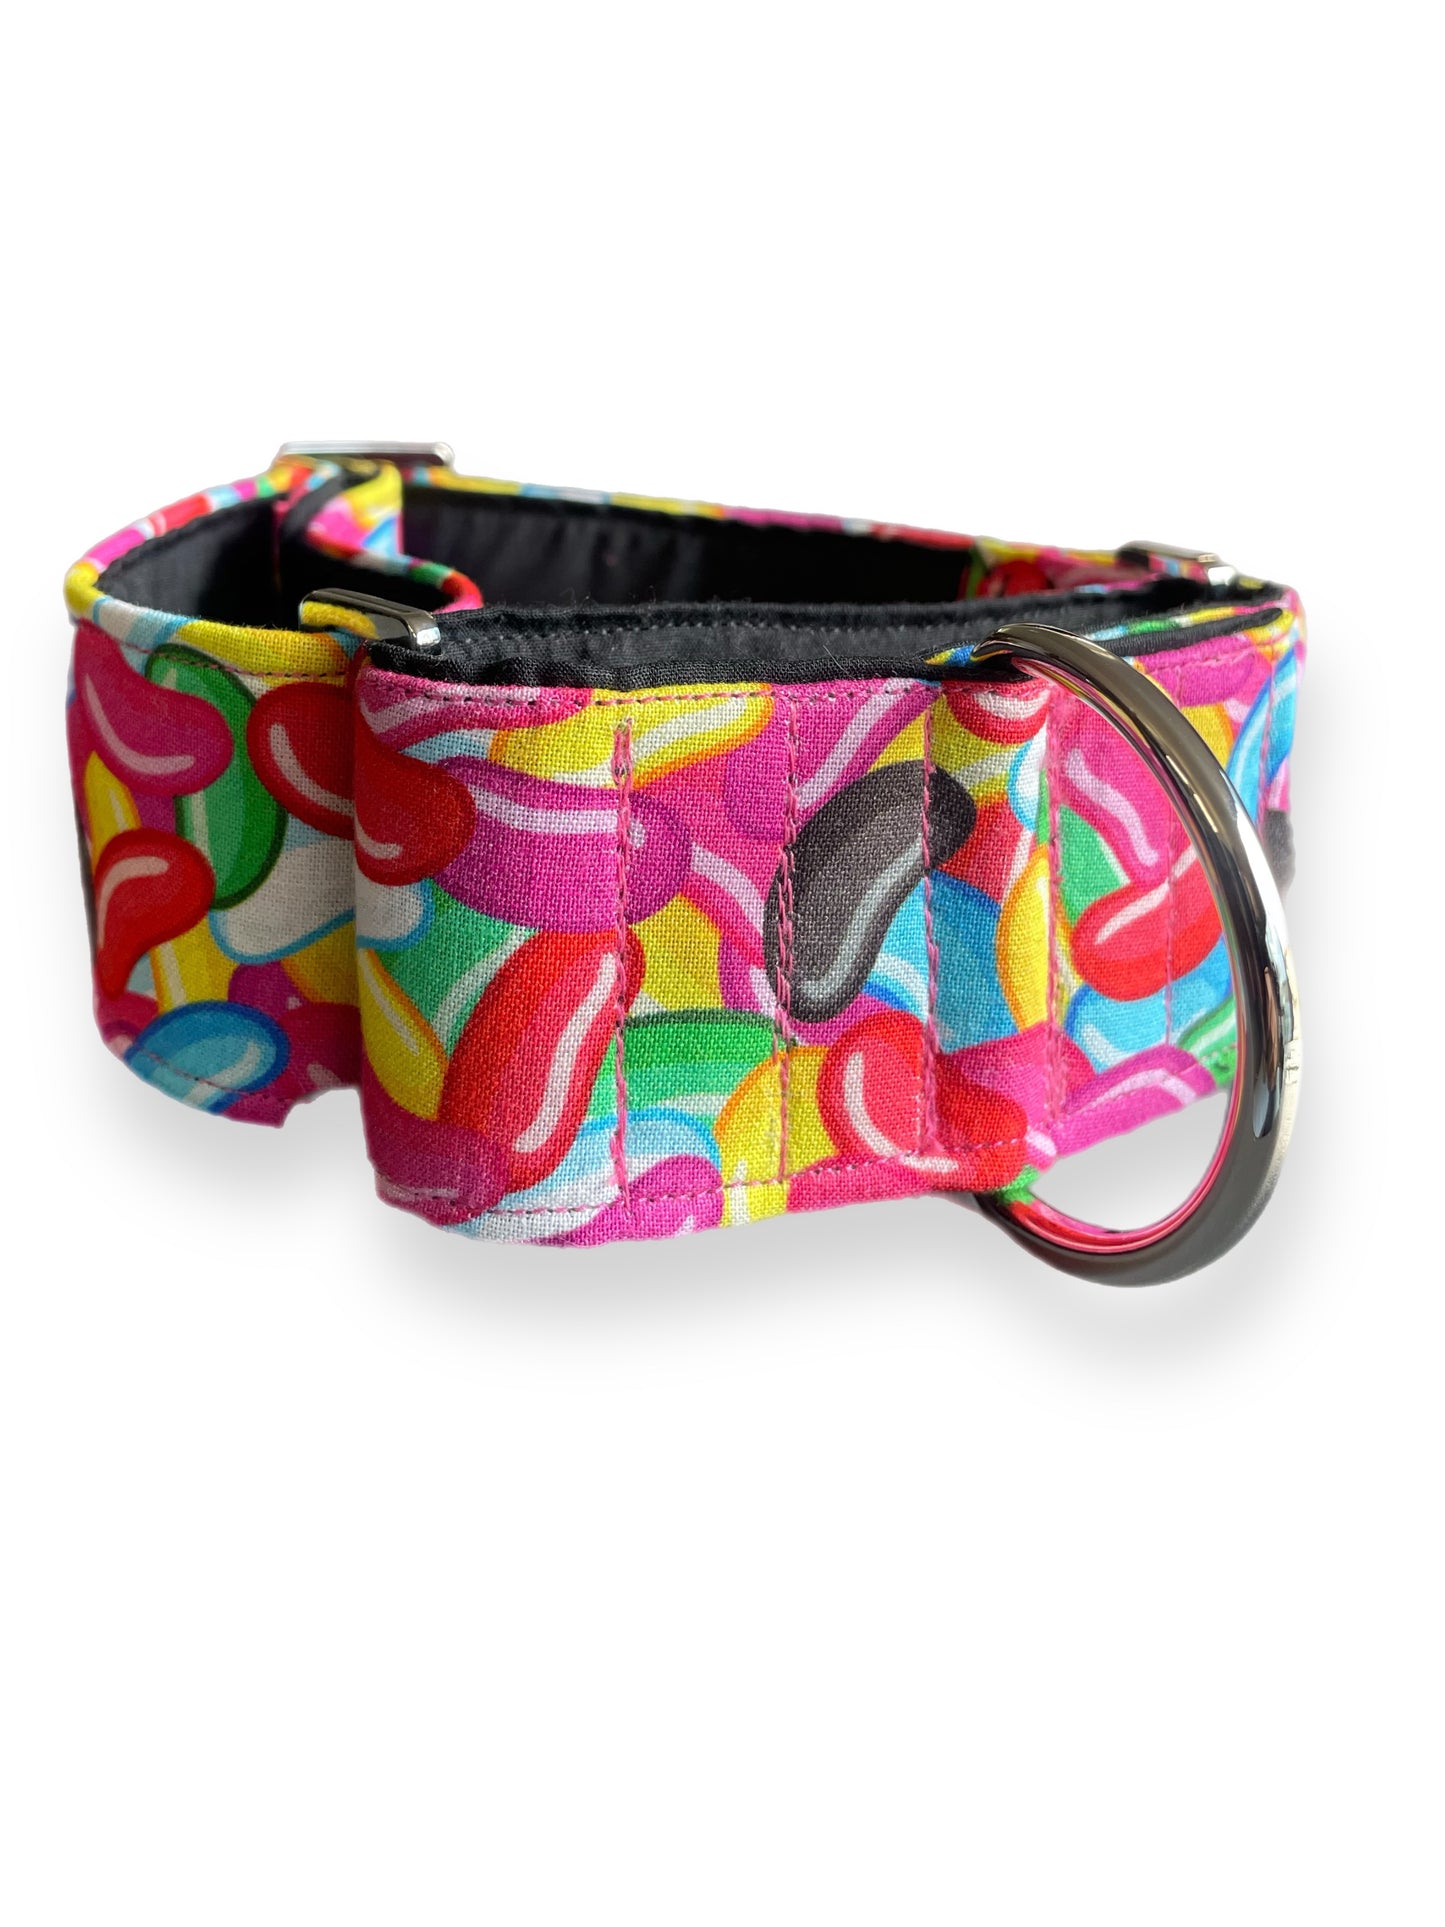 Jelly beans design in bright colors greyhound whippet wide Martingale collar cotton covered super soft